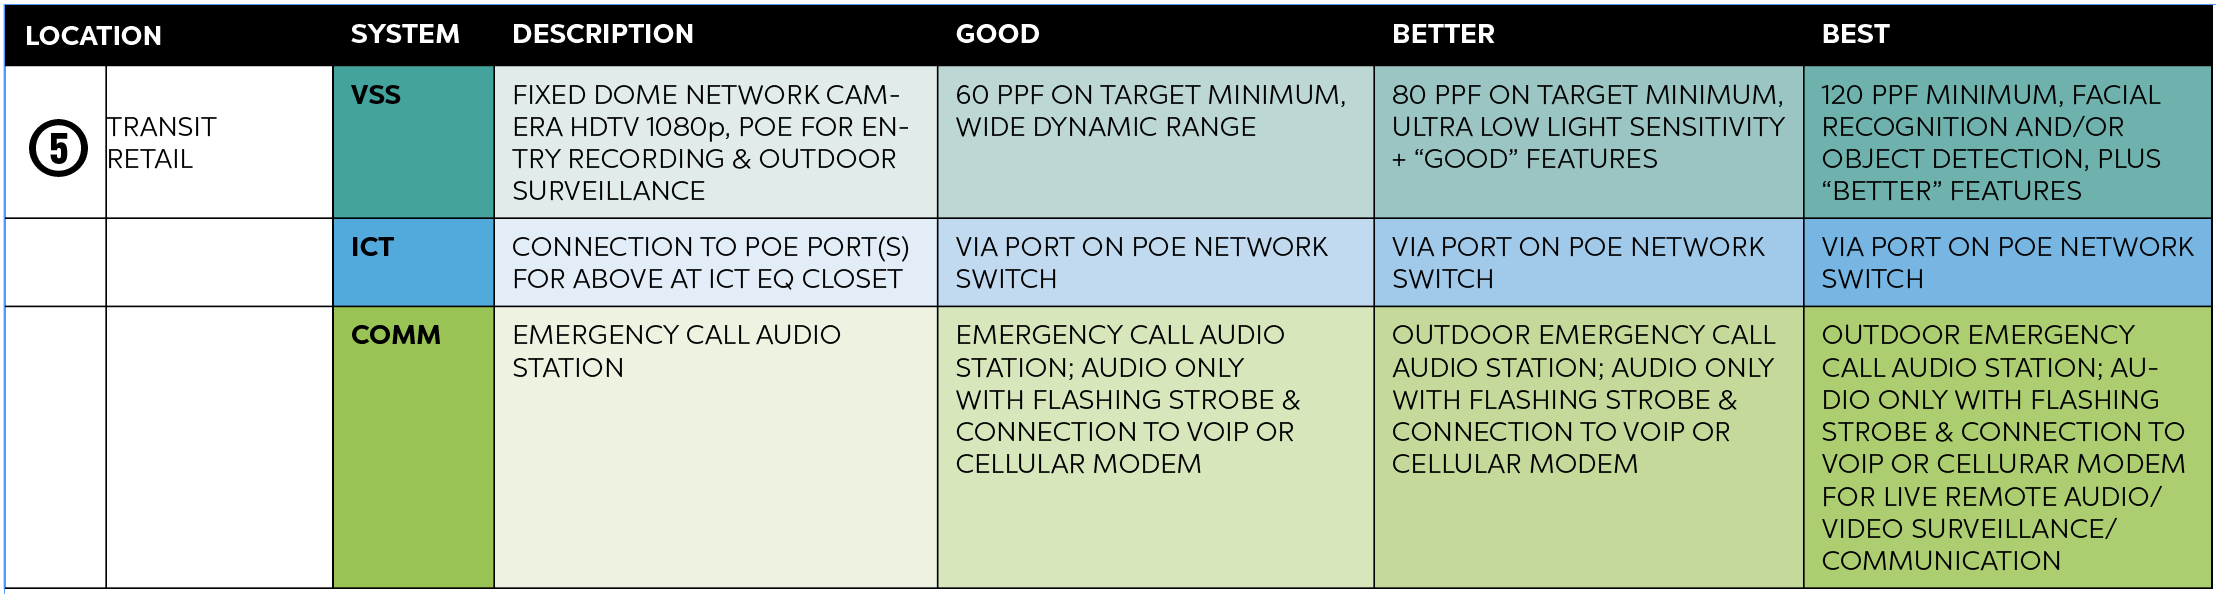 Good, Better and Best system recommendations for transit retail, including specifications for video surveillance, ICT and communications. To view the guidance with all graphs and charts, please download the full PDF.